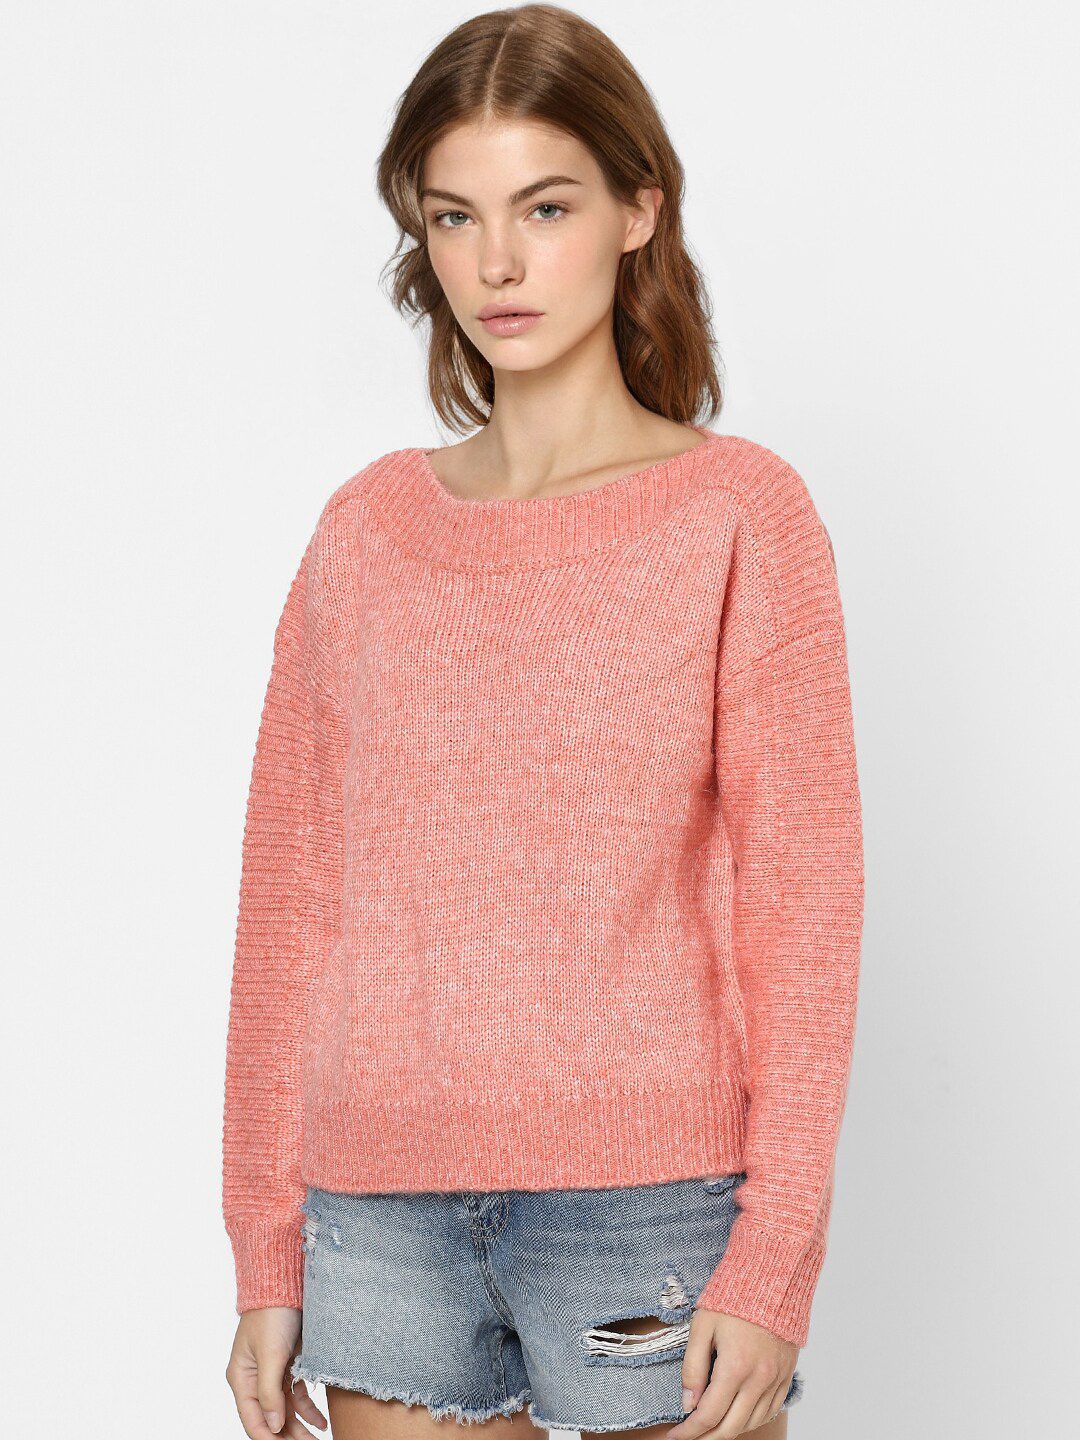 ONLY Women Coral Orange Striped Acrylic Pullover Price in India